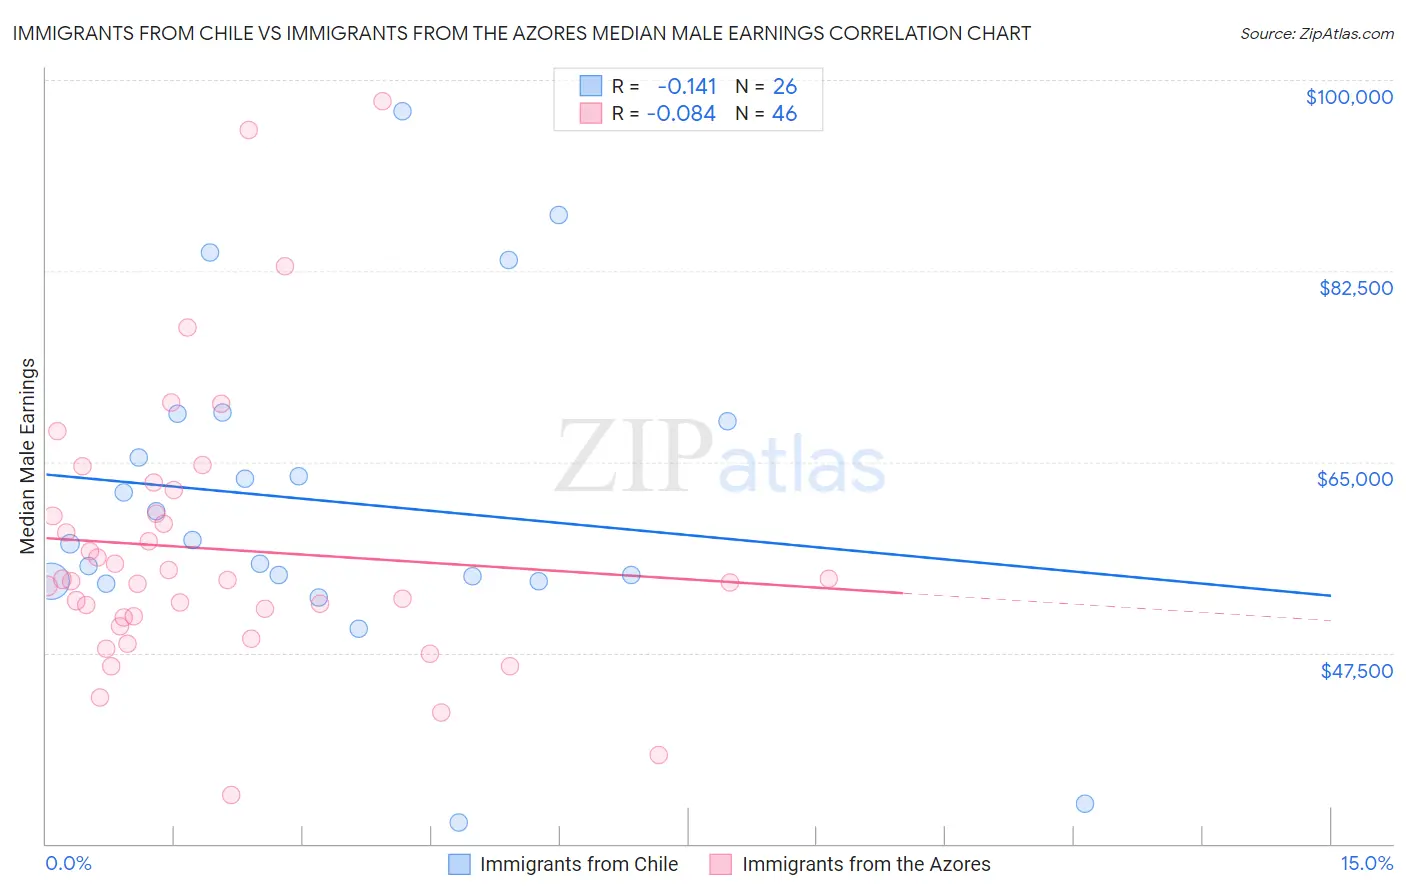 Immigrants from Chile vs Immigrants from the Azores Median Male Earnings